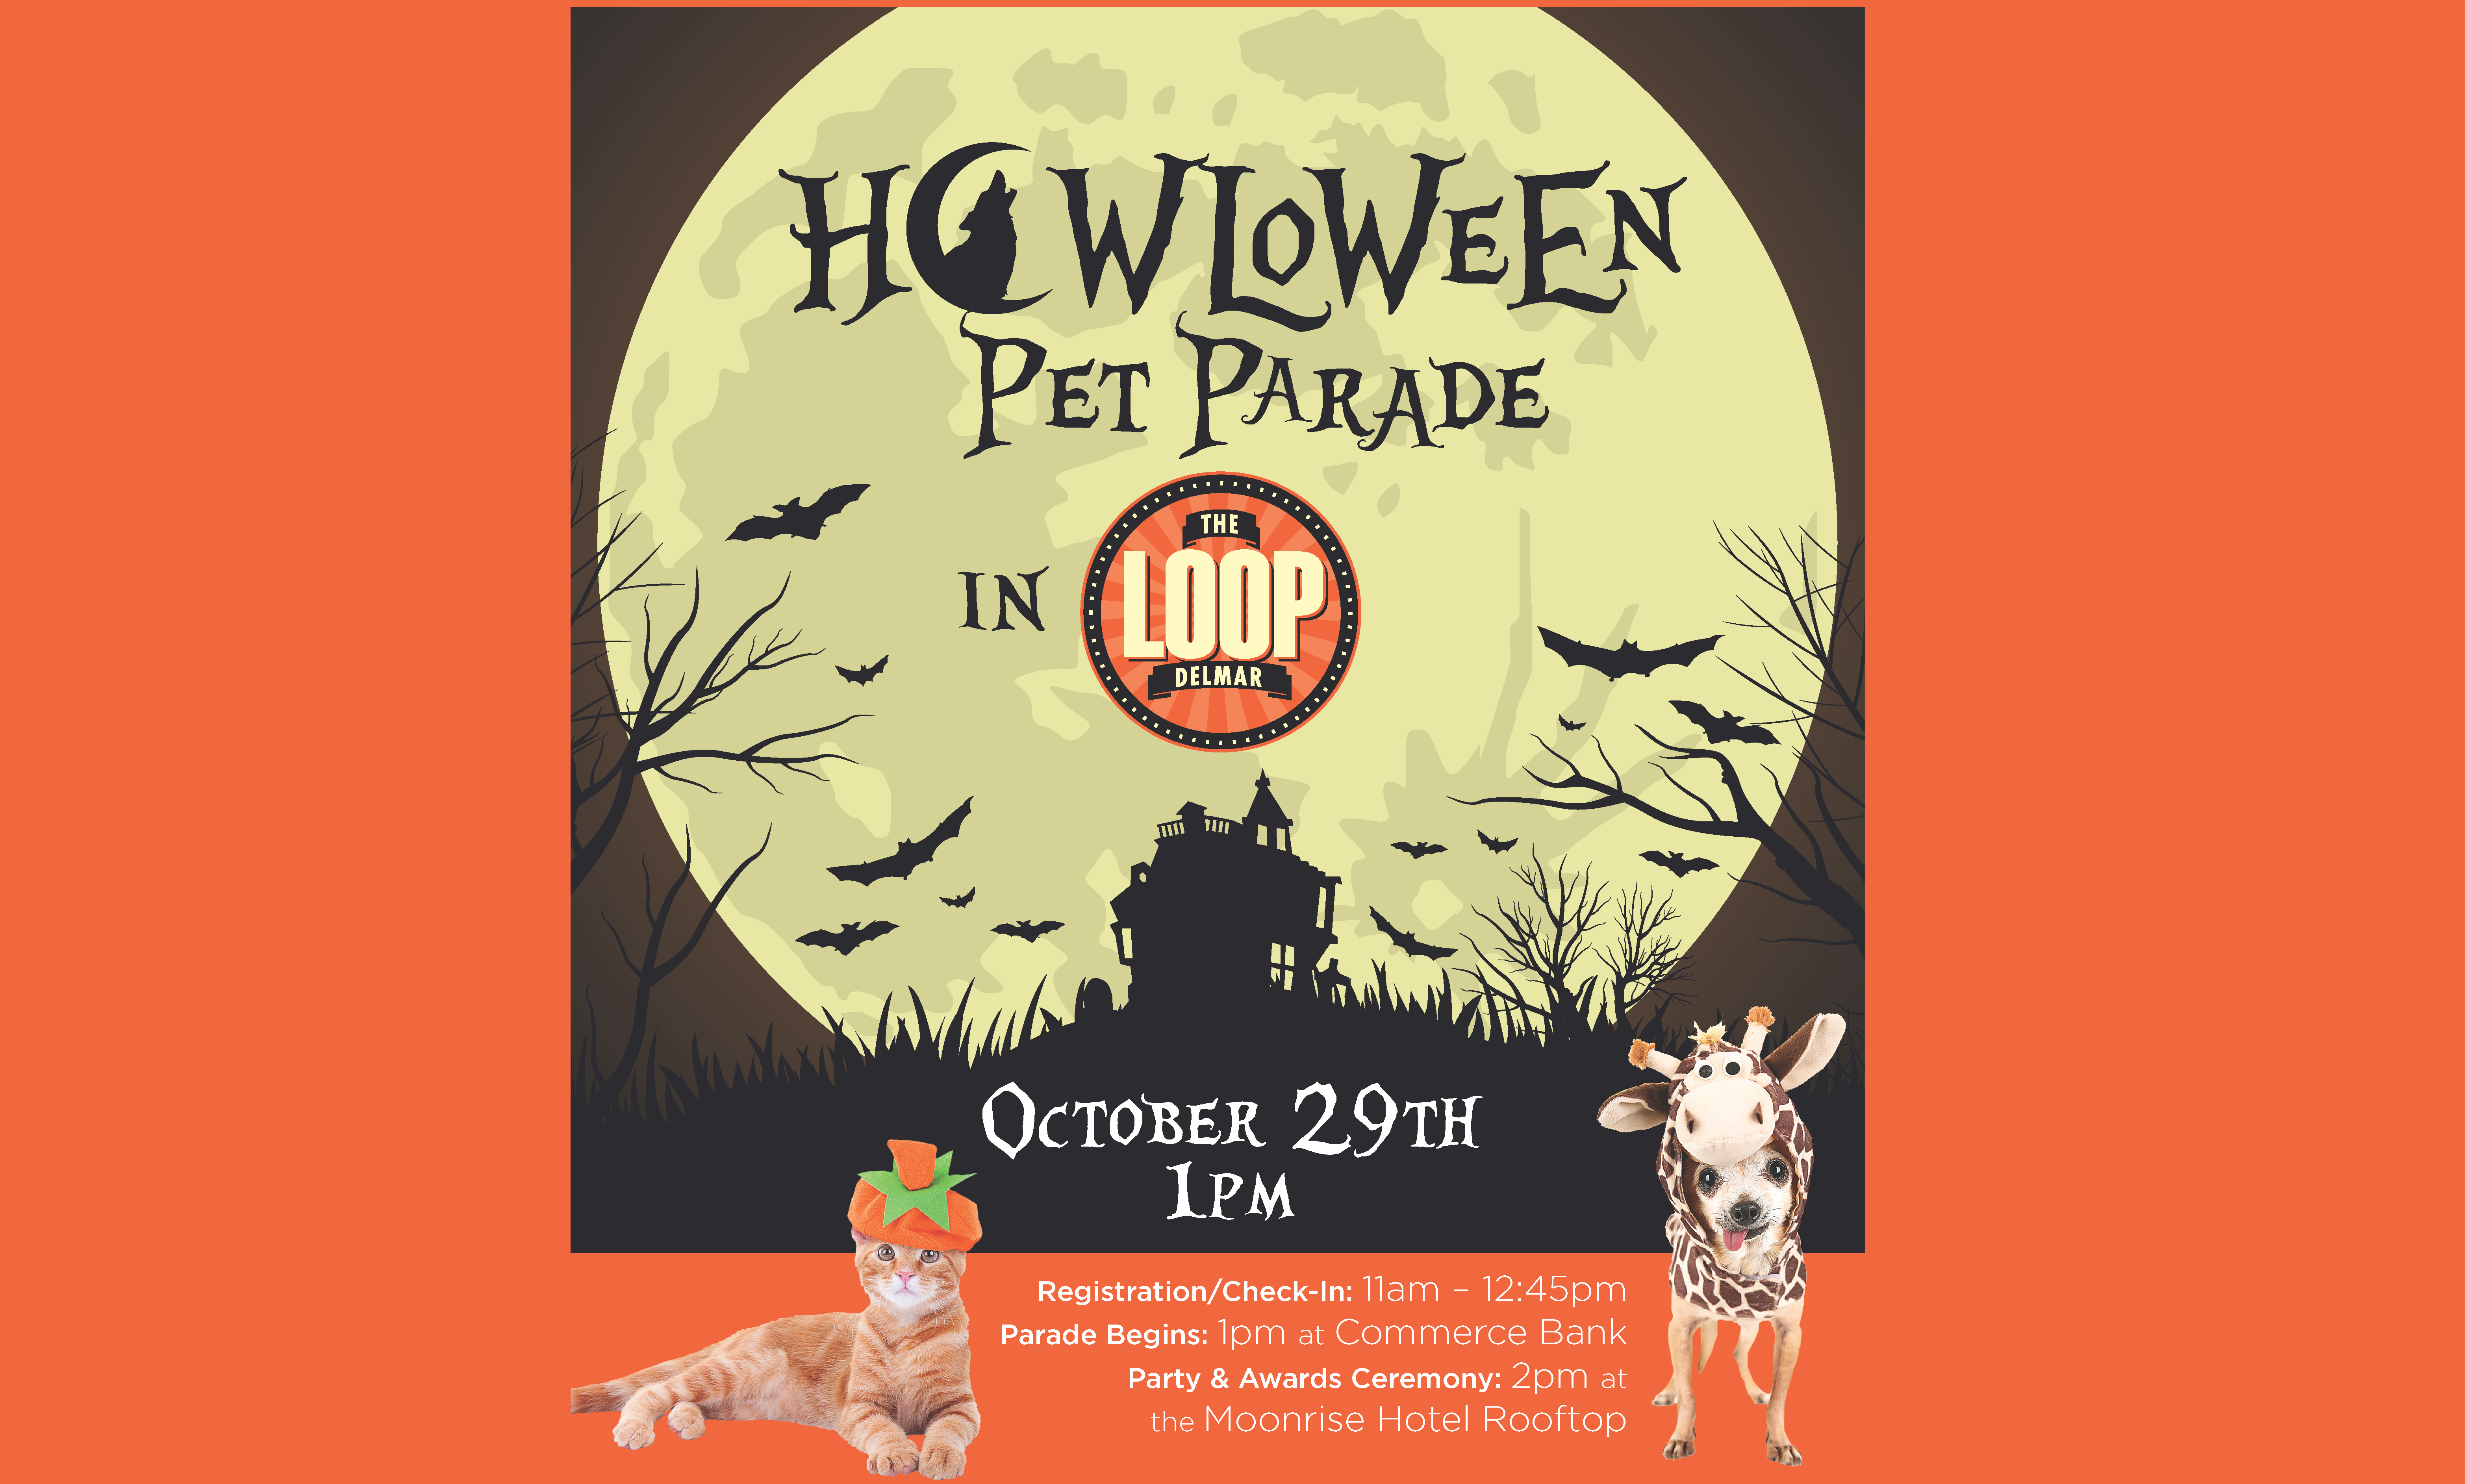 Howl-o-Ween Pet Parade is Oct 29th!